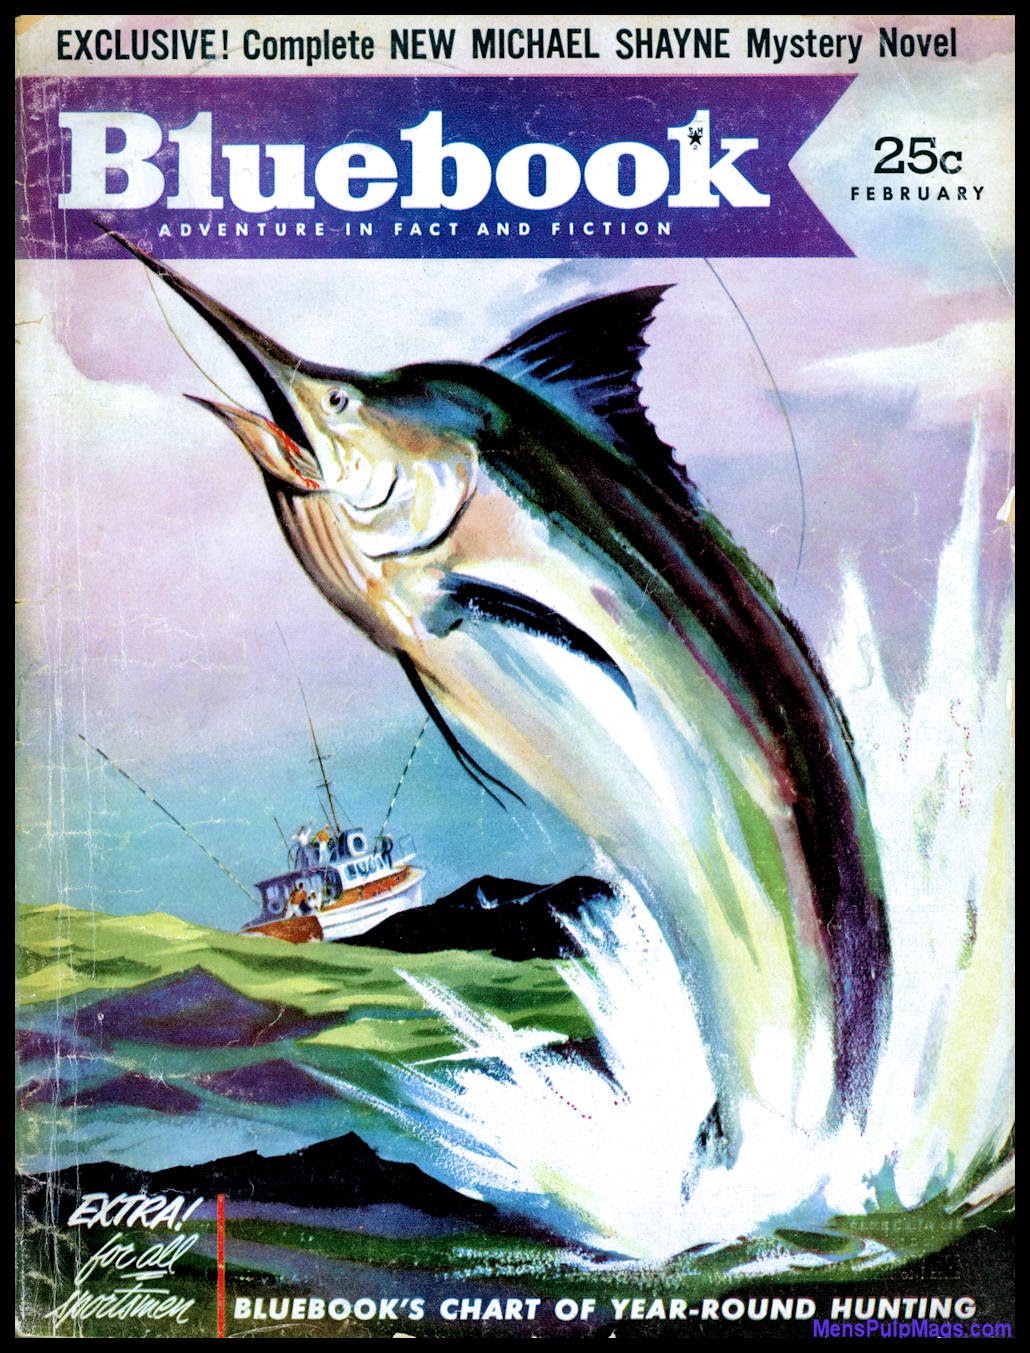 Mike Shayne in men's adventure magazines – Part 1: “The Naked Frame” in  BLUEBOOK, Feb. 1953 - The Men's Adventure Magazines Blog